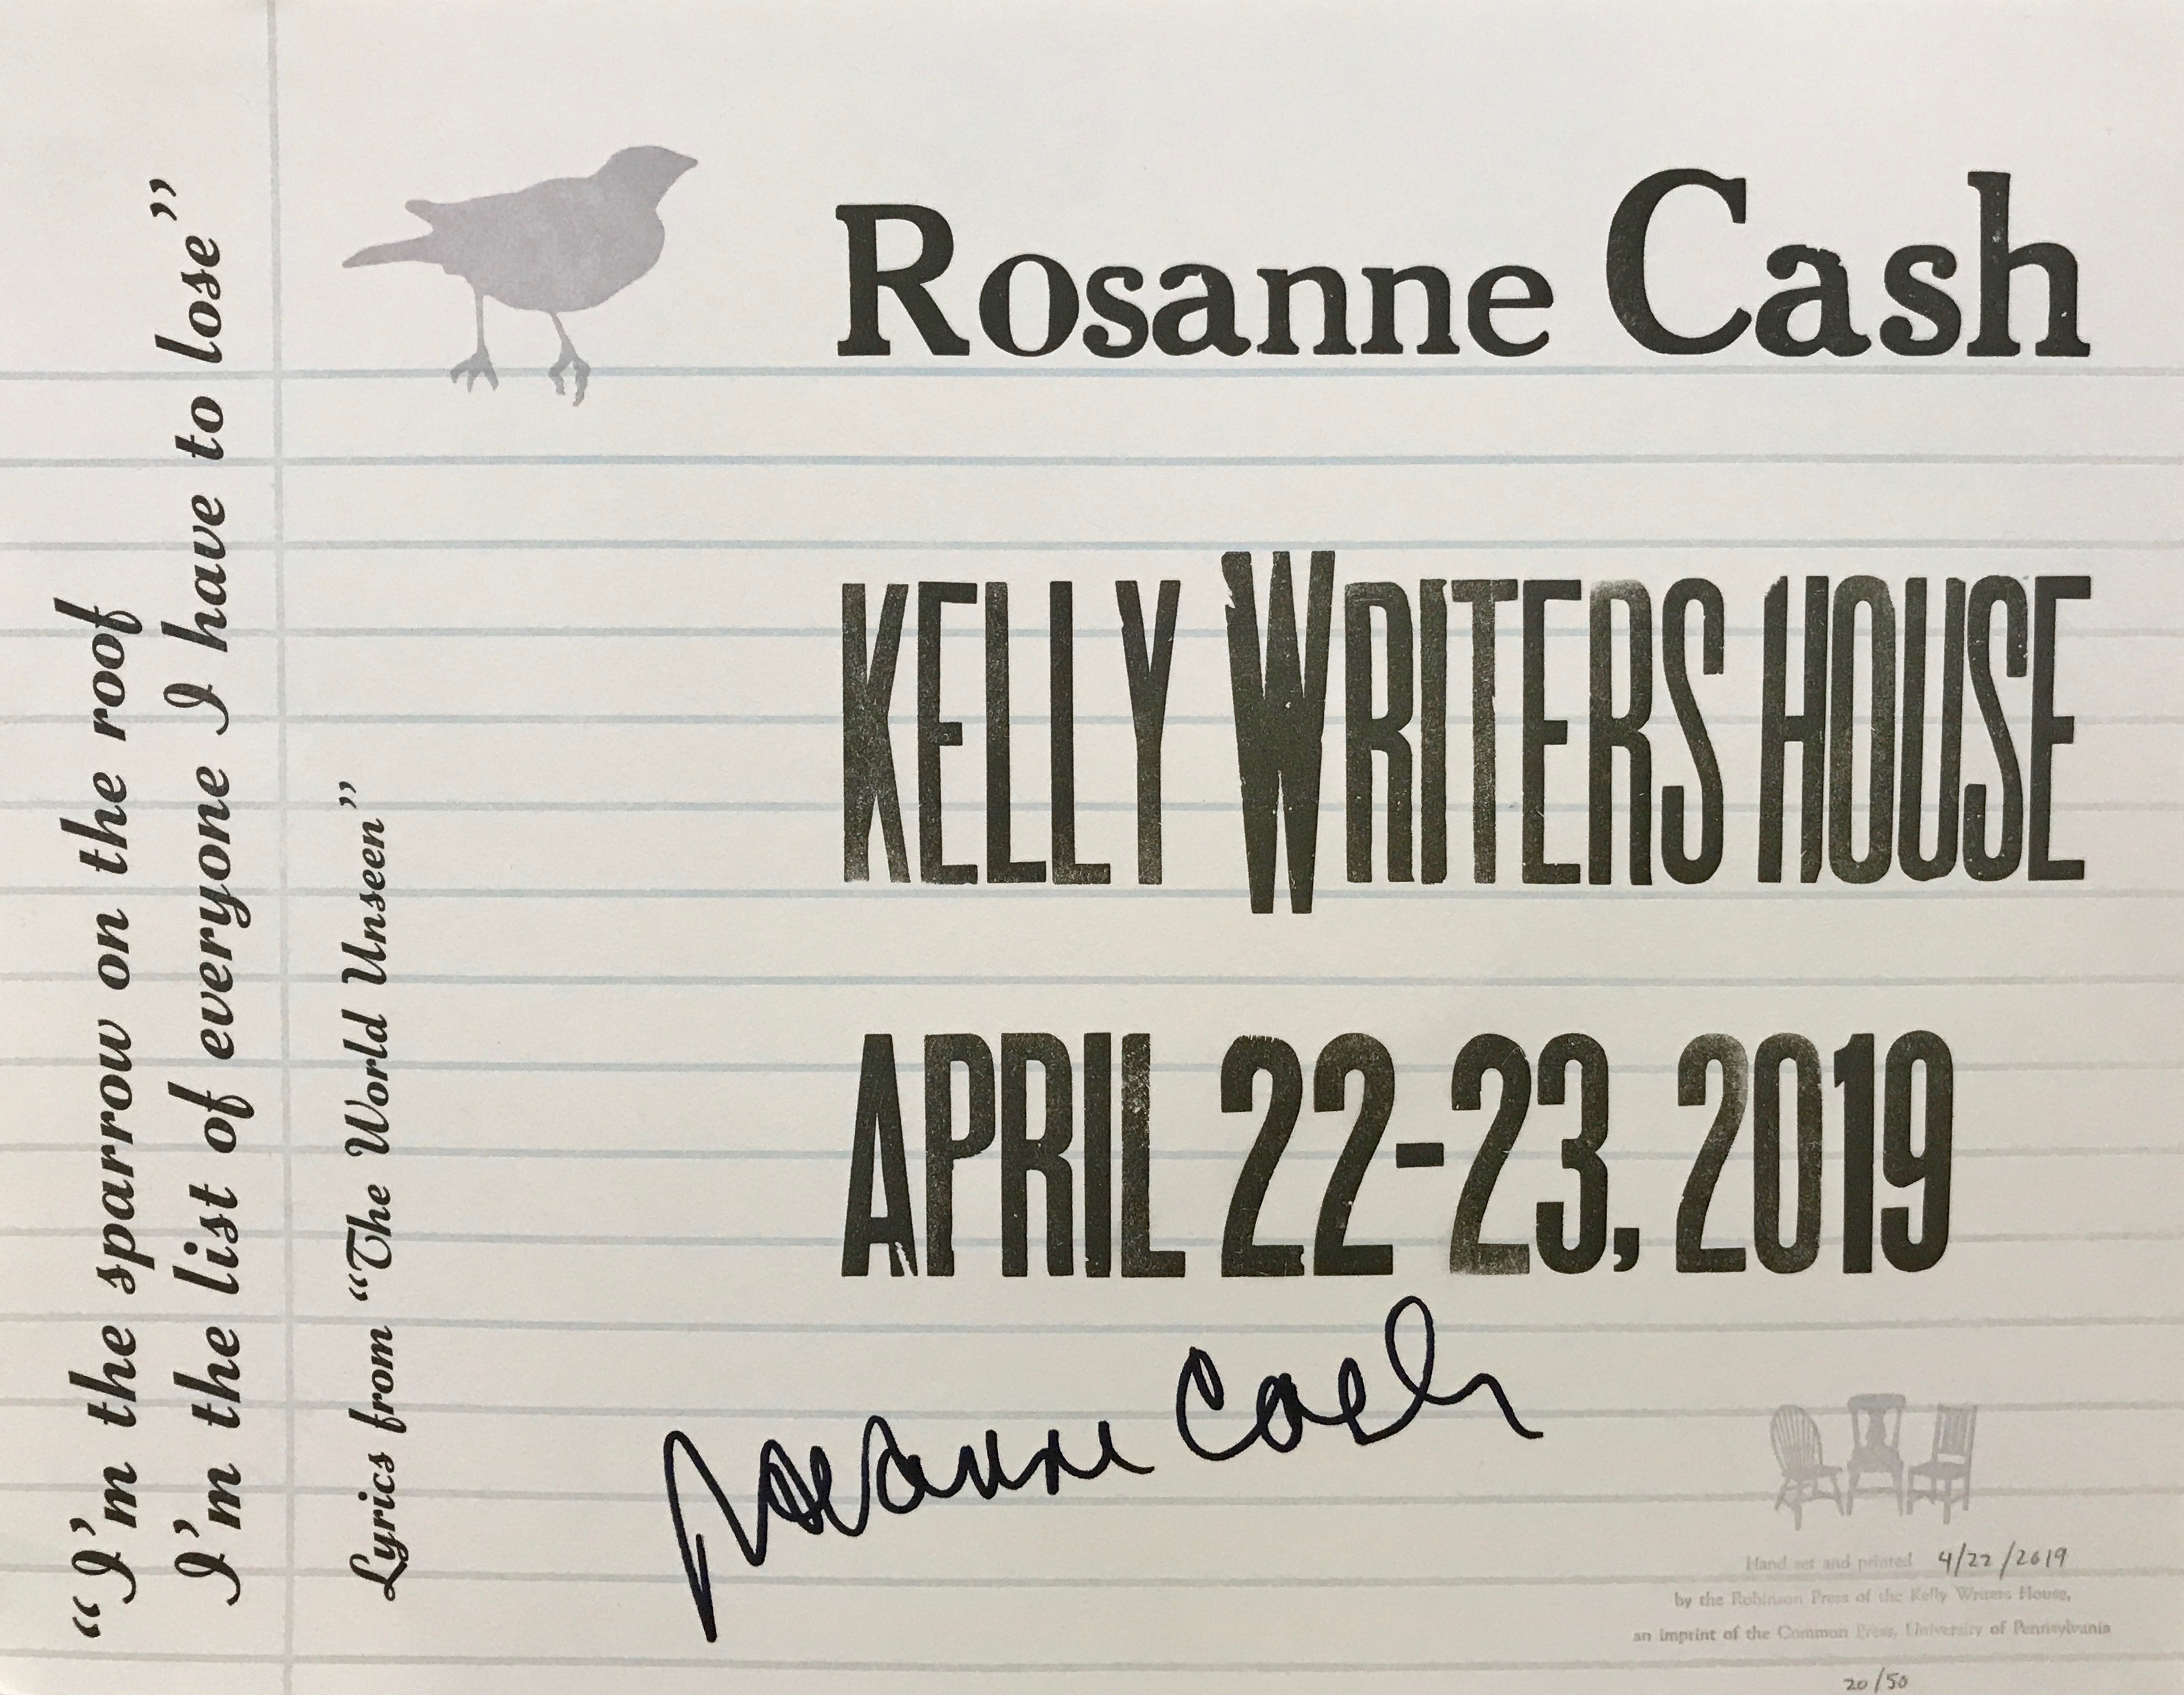 Hand-printed broadside reading Roseanne Cash Kelly Writers House April 22-23 2019 and the lyrics I'm the sparrow on the roof I' the list of everyone I have to lose.